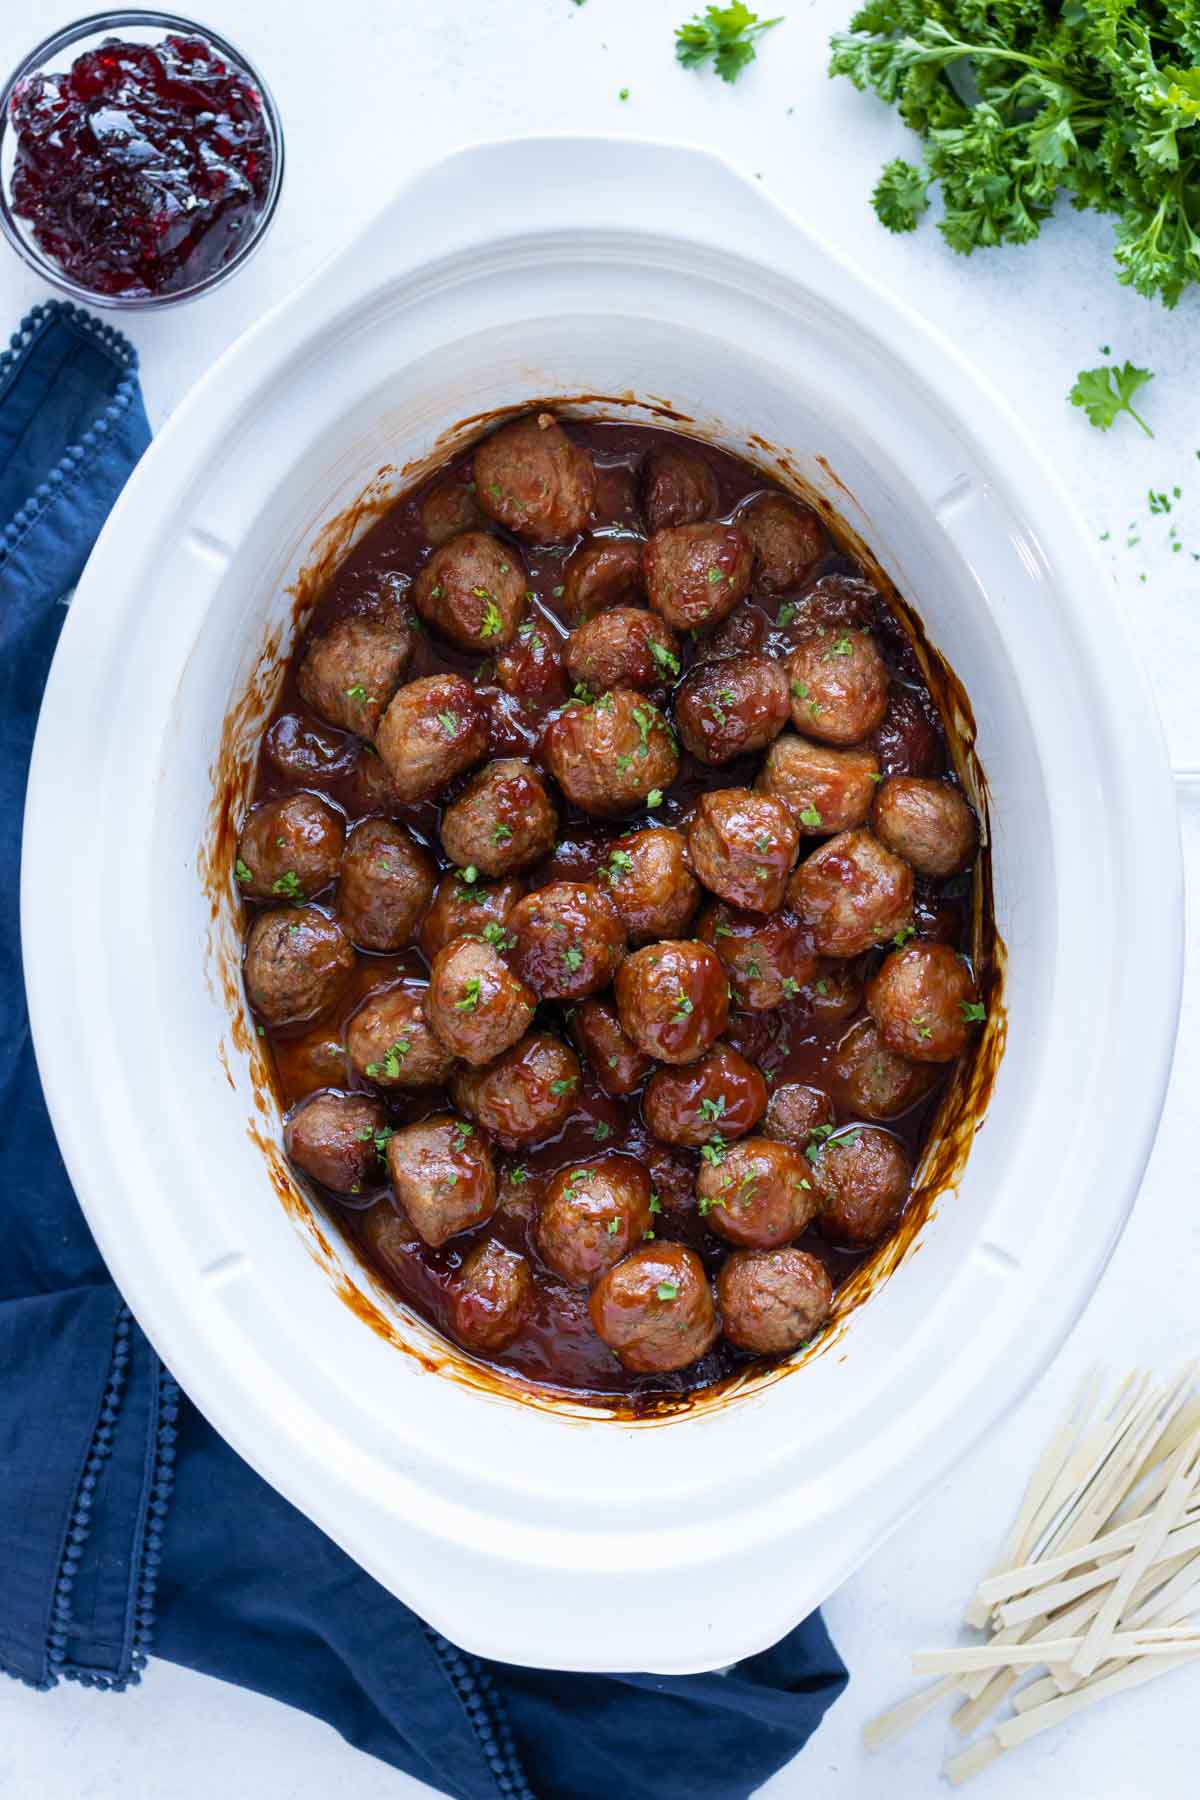 Crockpot grape jelly meatballs are served with a sweet and sour sauce.